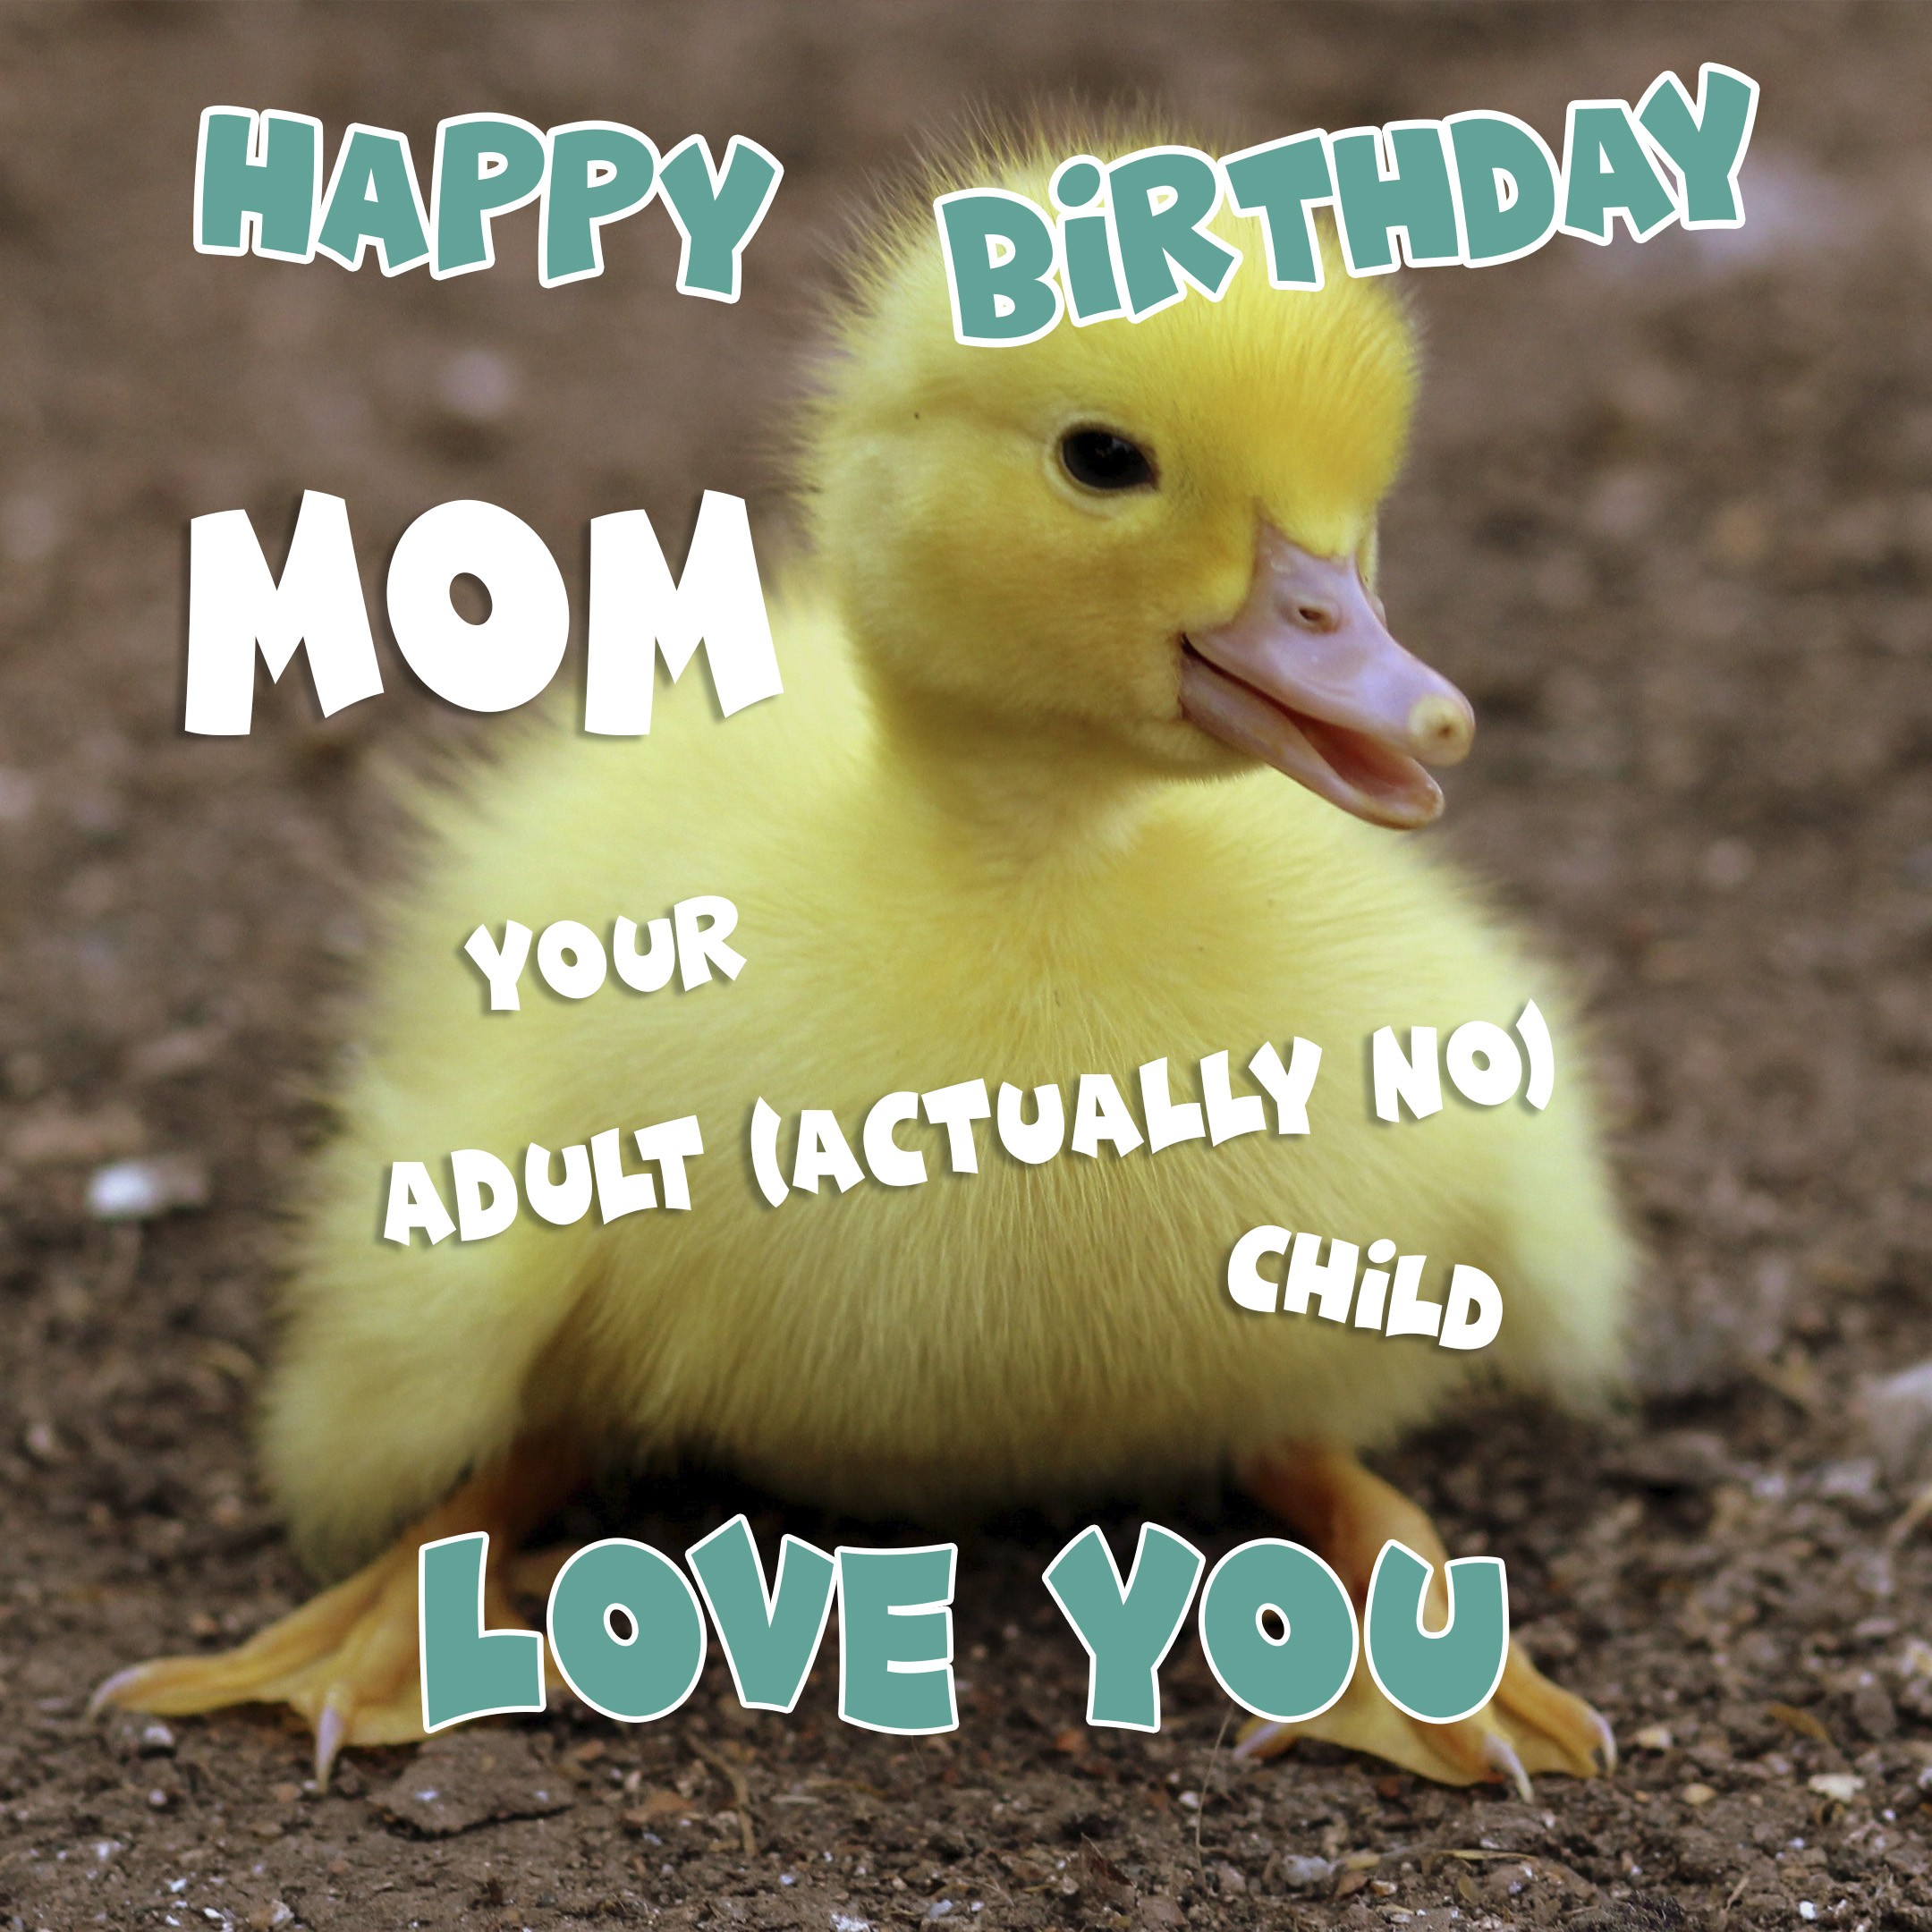 Free Funny Happy Birthday Image For Mom With Duckling 